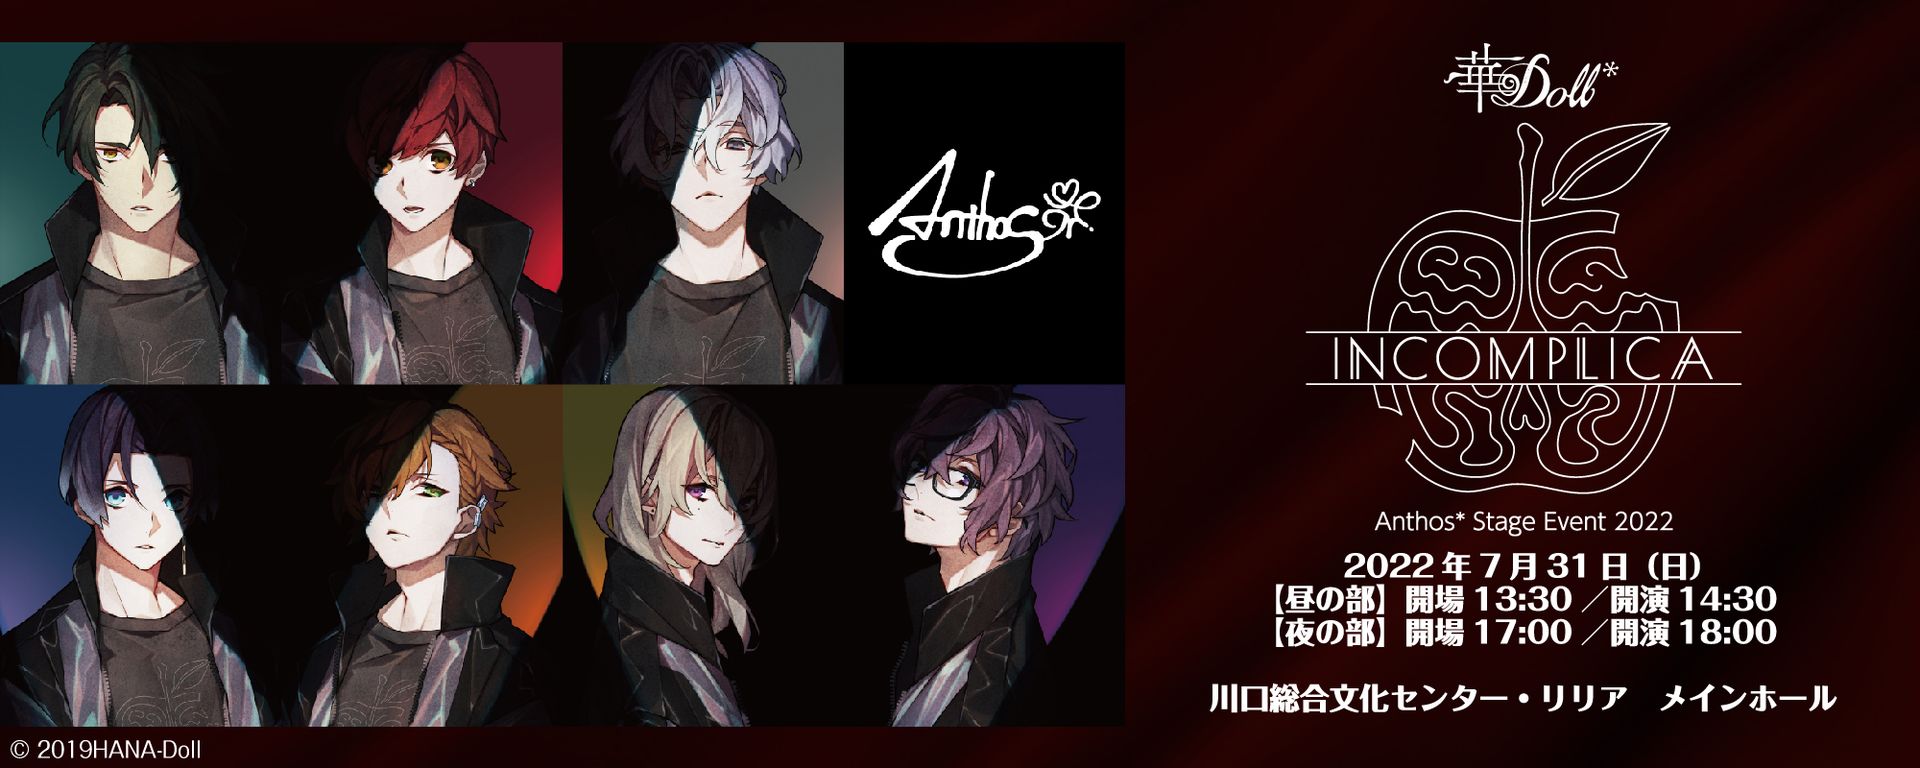 [Streaming+] 華Doll* -INCOMPLICA- Anthos* Stage Event 2022